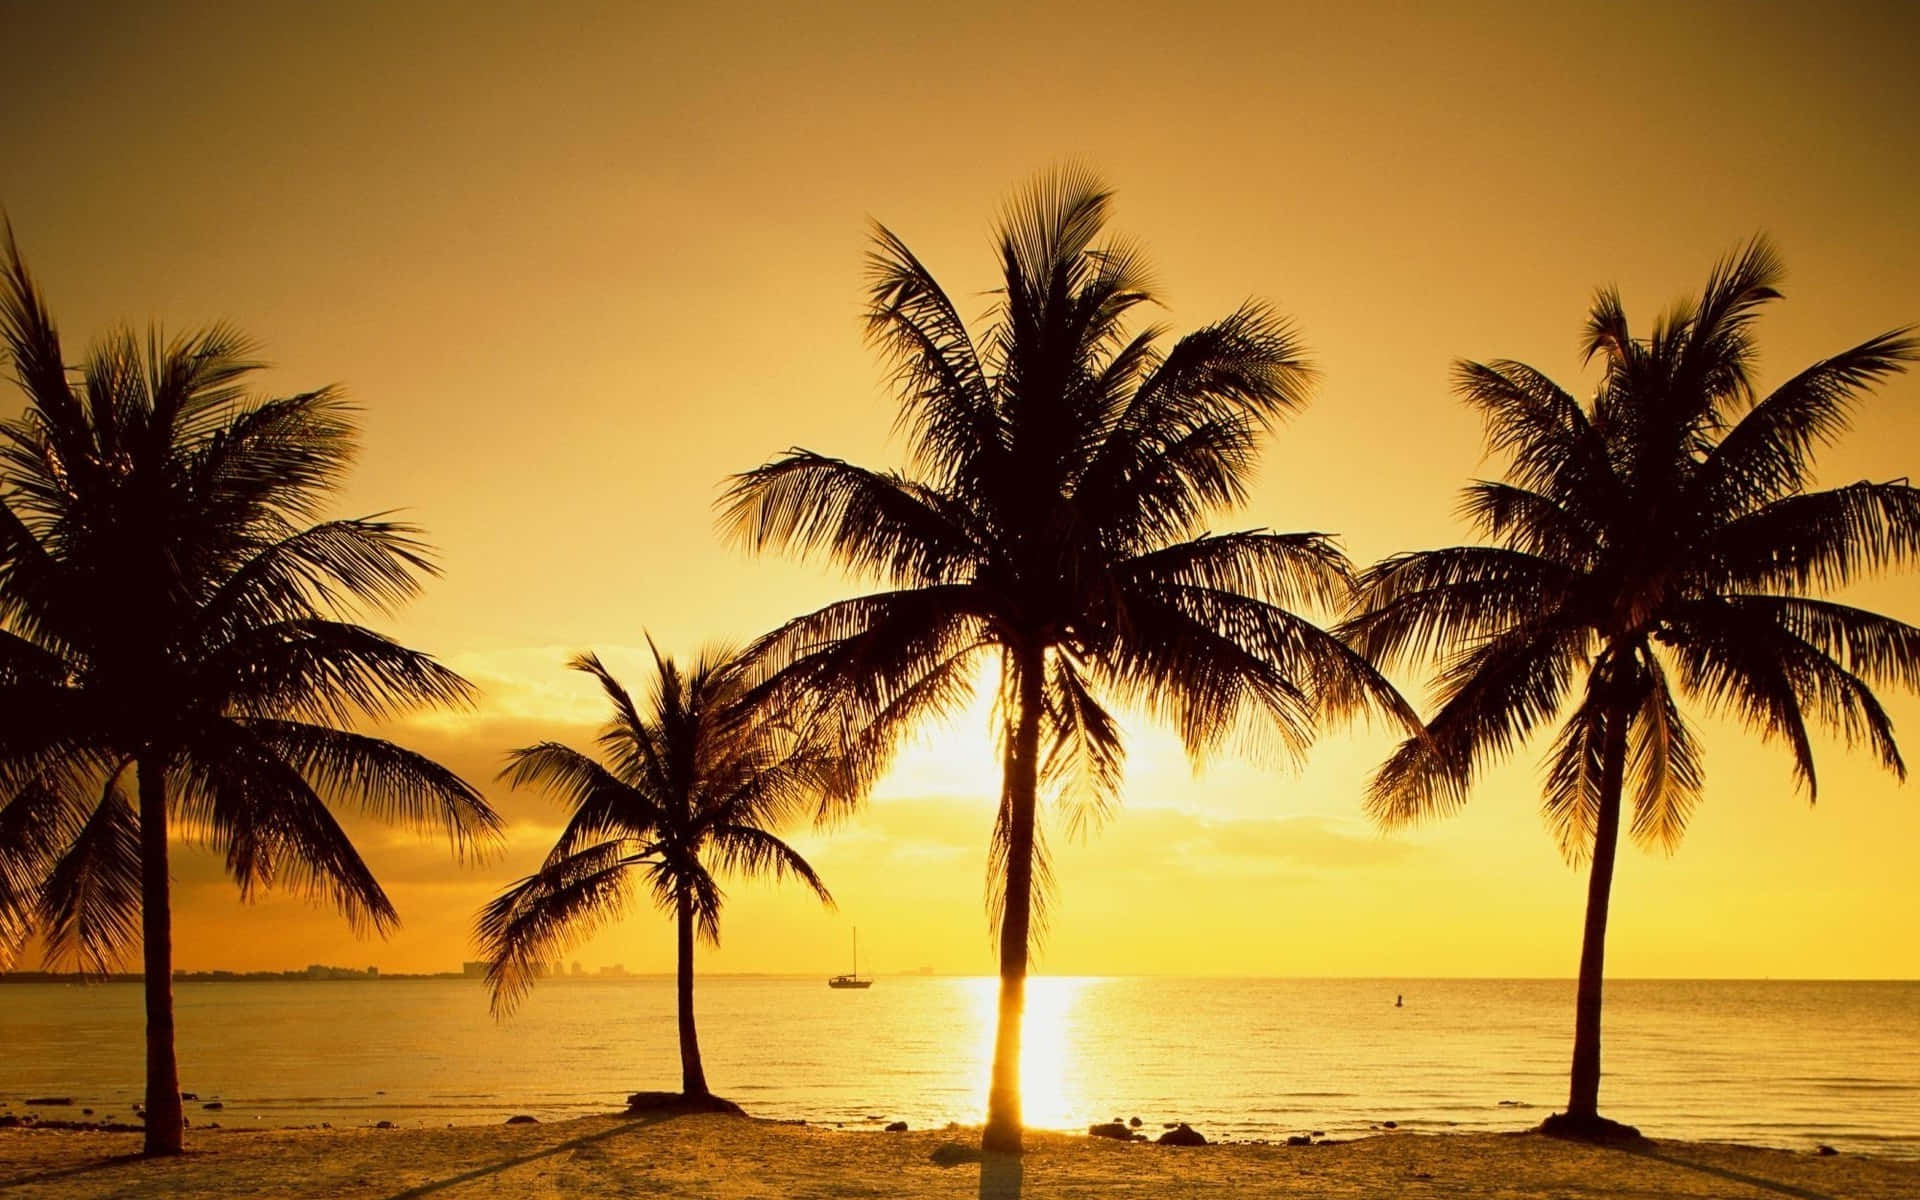 Enjoy The View Of A Beautiful Palm Tree At Sunset